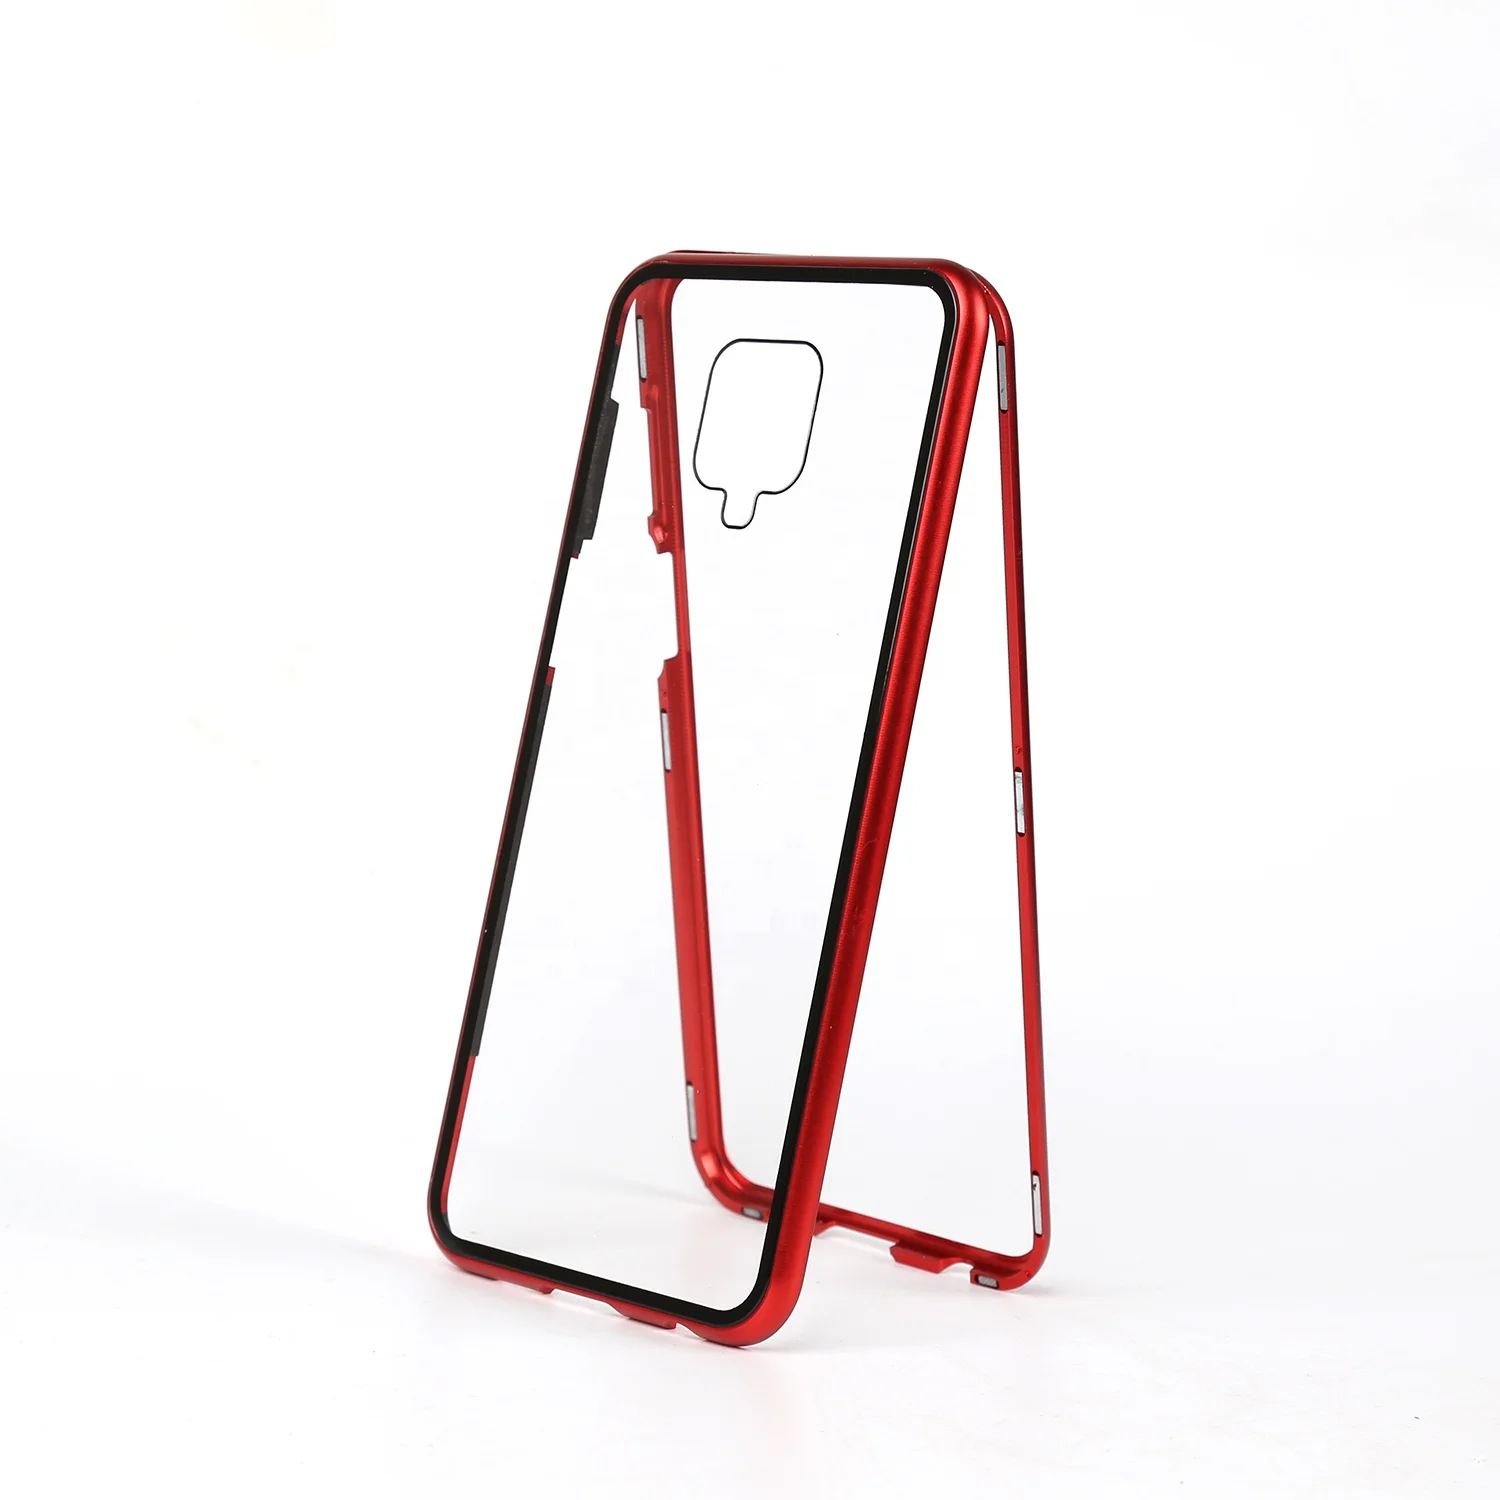 

360 Magnetic Adsorption Phone Case Luxury Metal Bumper Tempered Glass Back Shell For Xiaomi Redmi Note 7 Pro Mi 9 8 9T K20 CC9 6